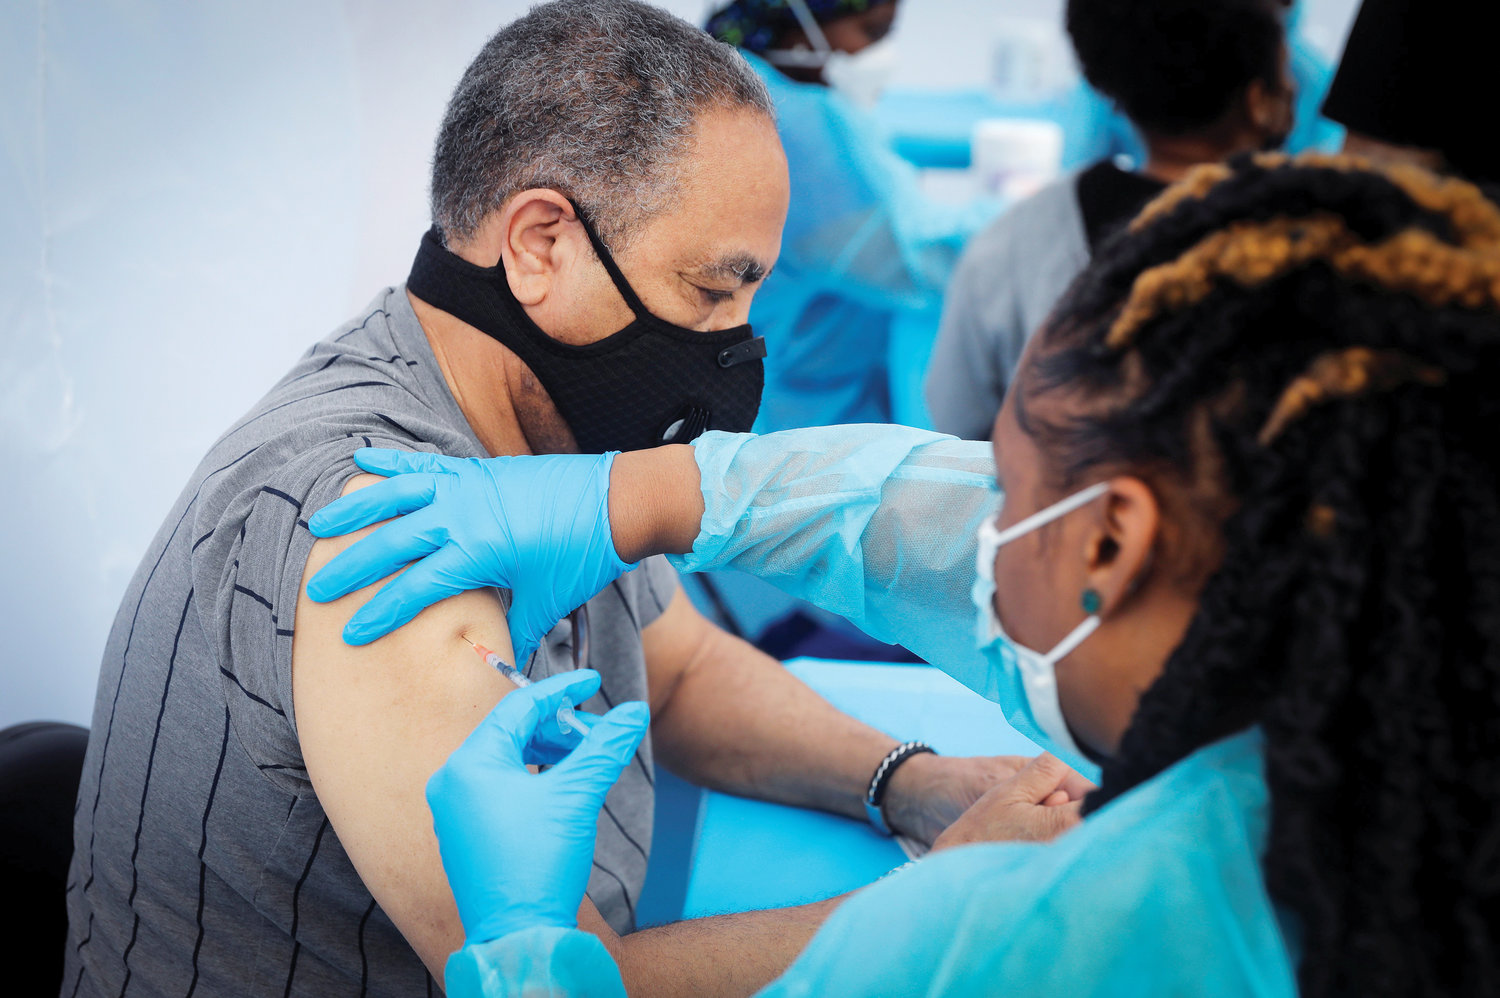 VACCINATED—Jay Hernandez, 72, receives a dose of the Pfizer-BioNTech Covid-19 vaccine during a vaccination event for local adolescents and adults outside the Bronx Writing Academy school June 4.